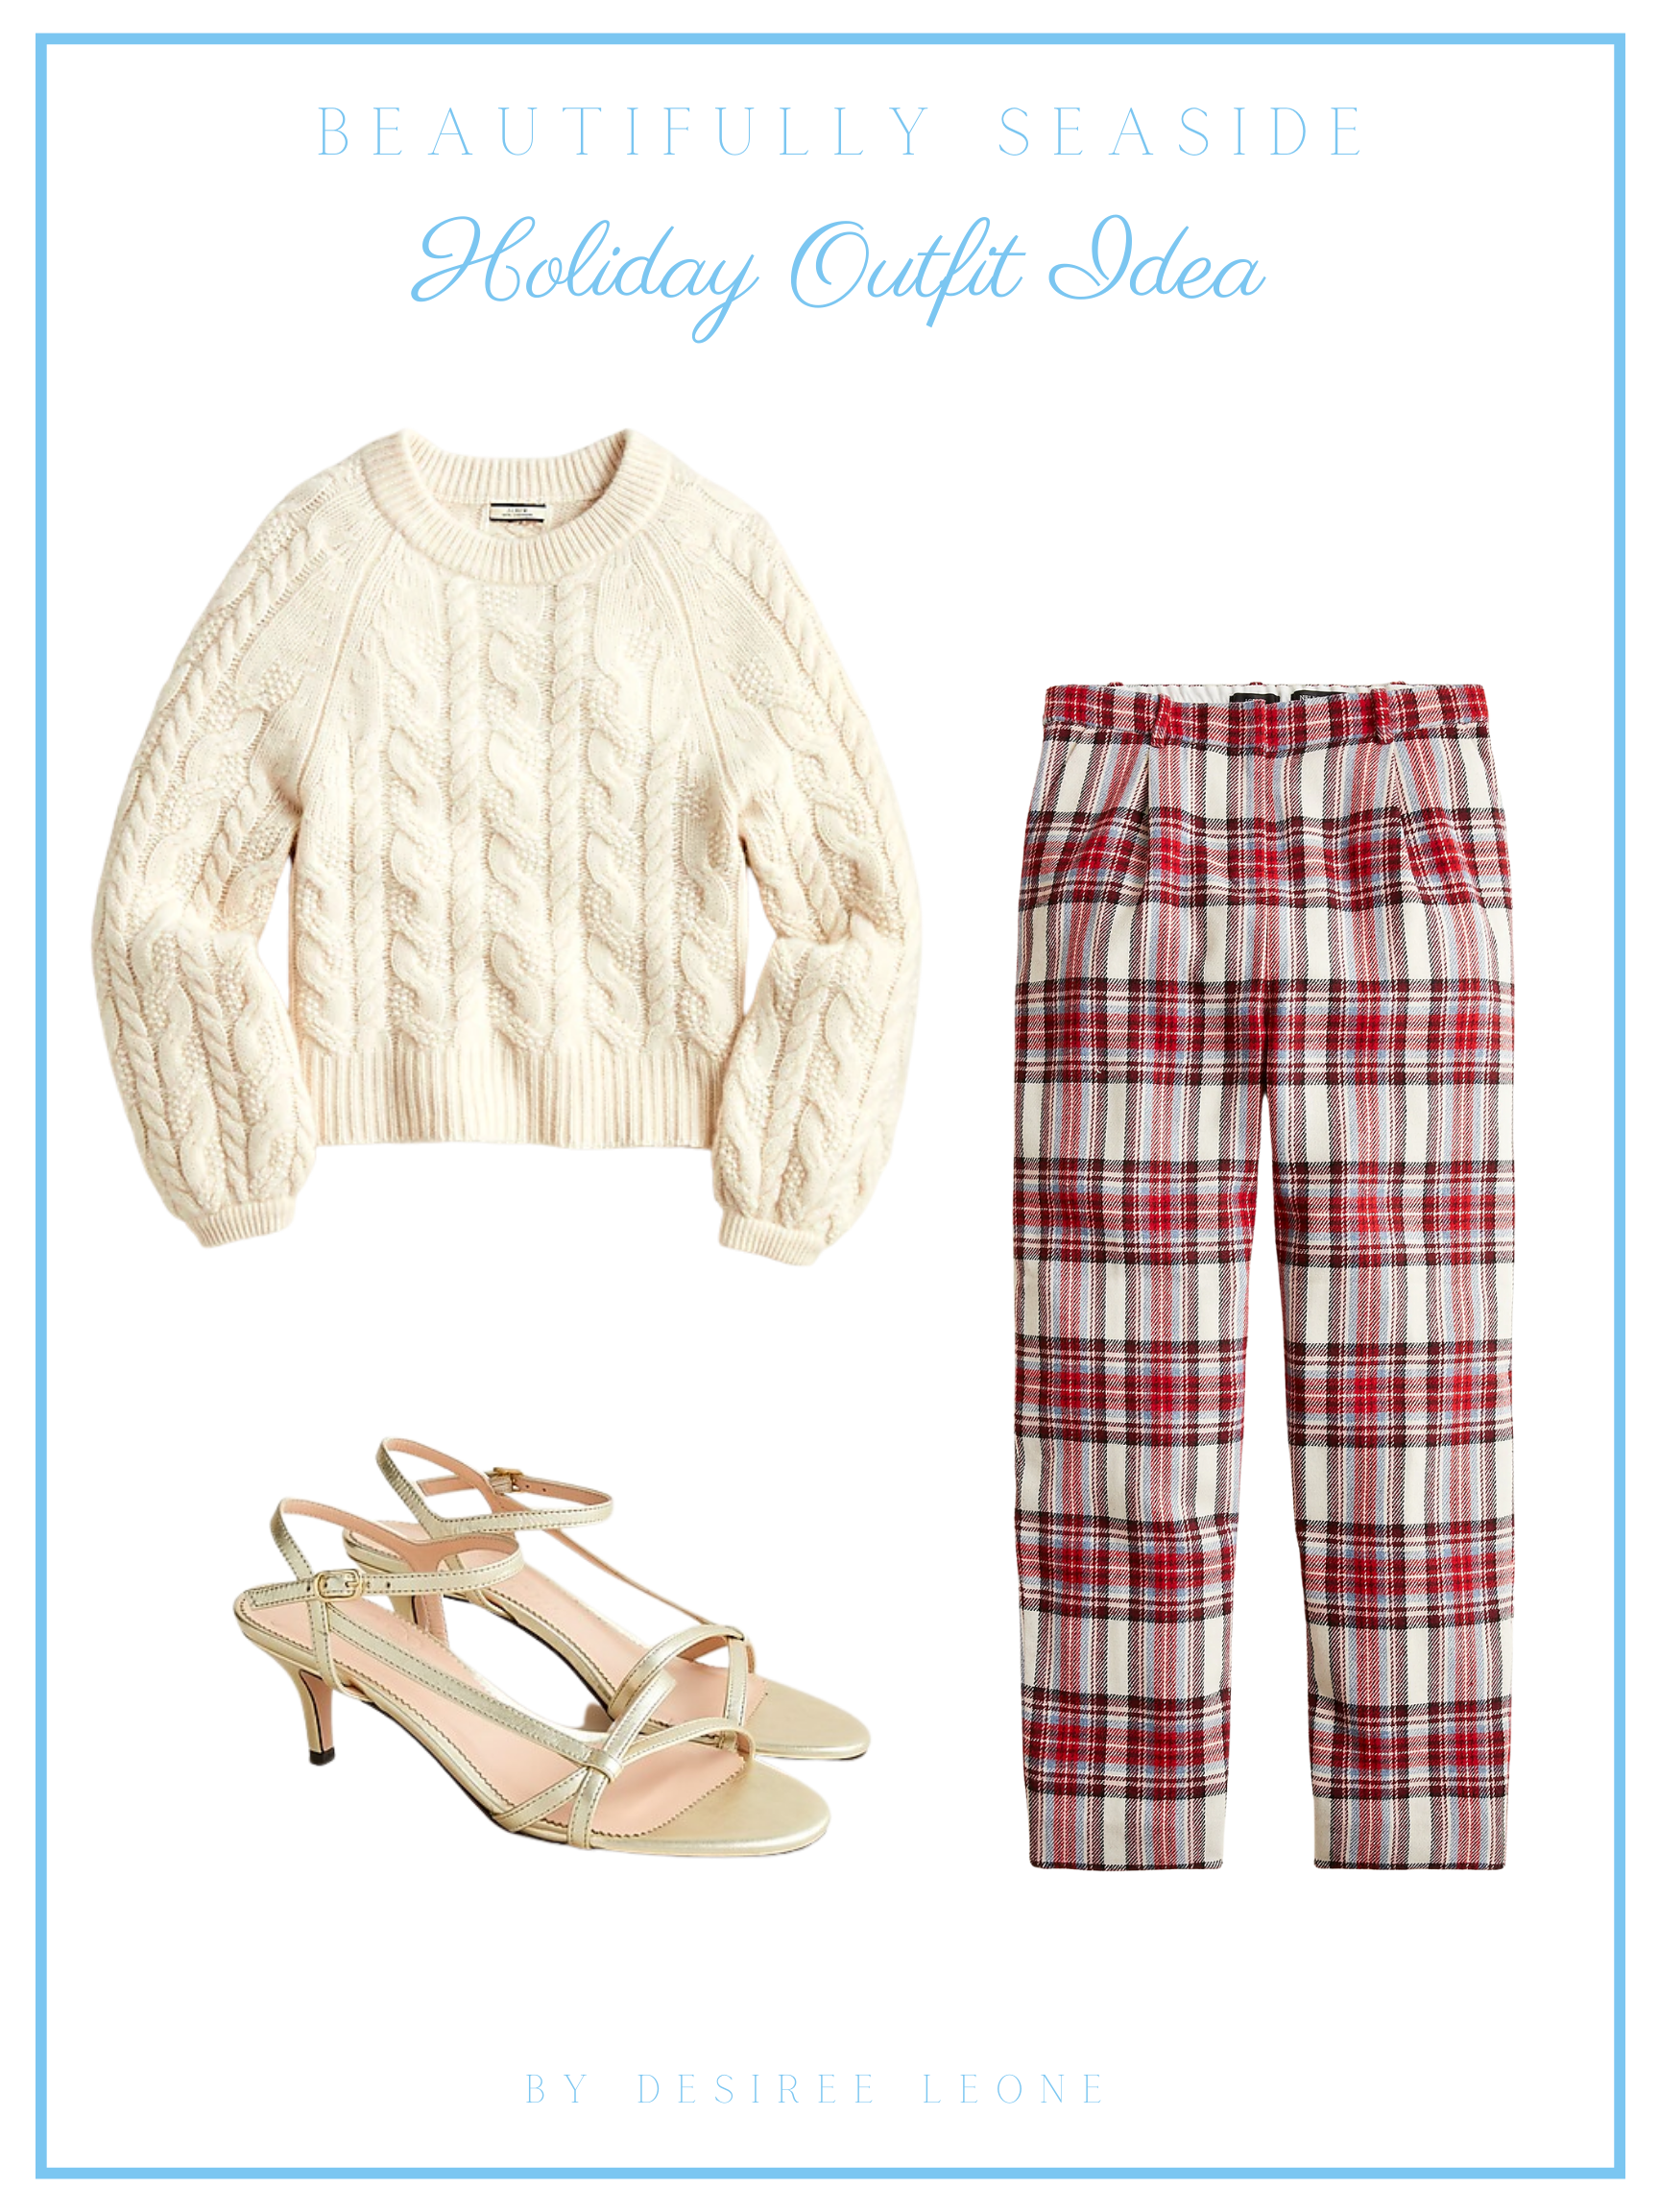 5 Holiday Outfit Ideas